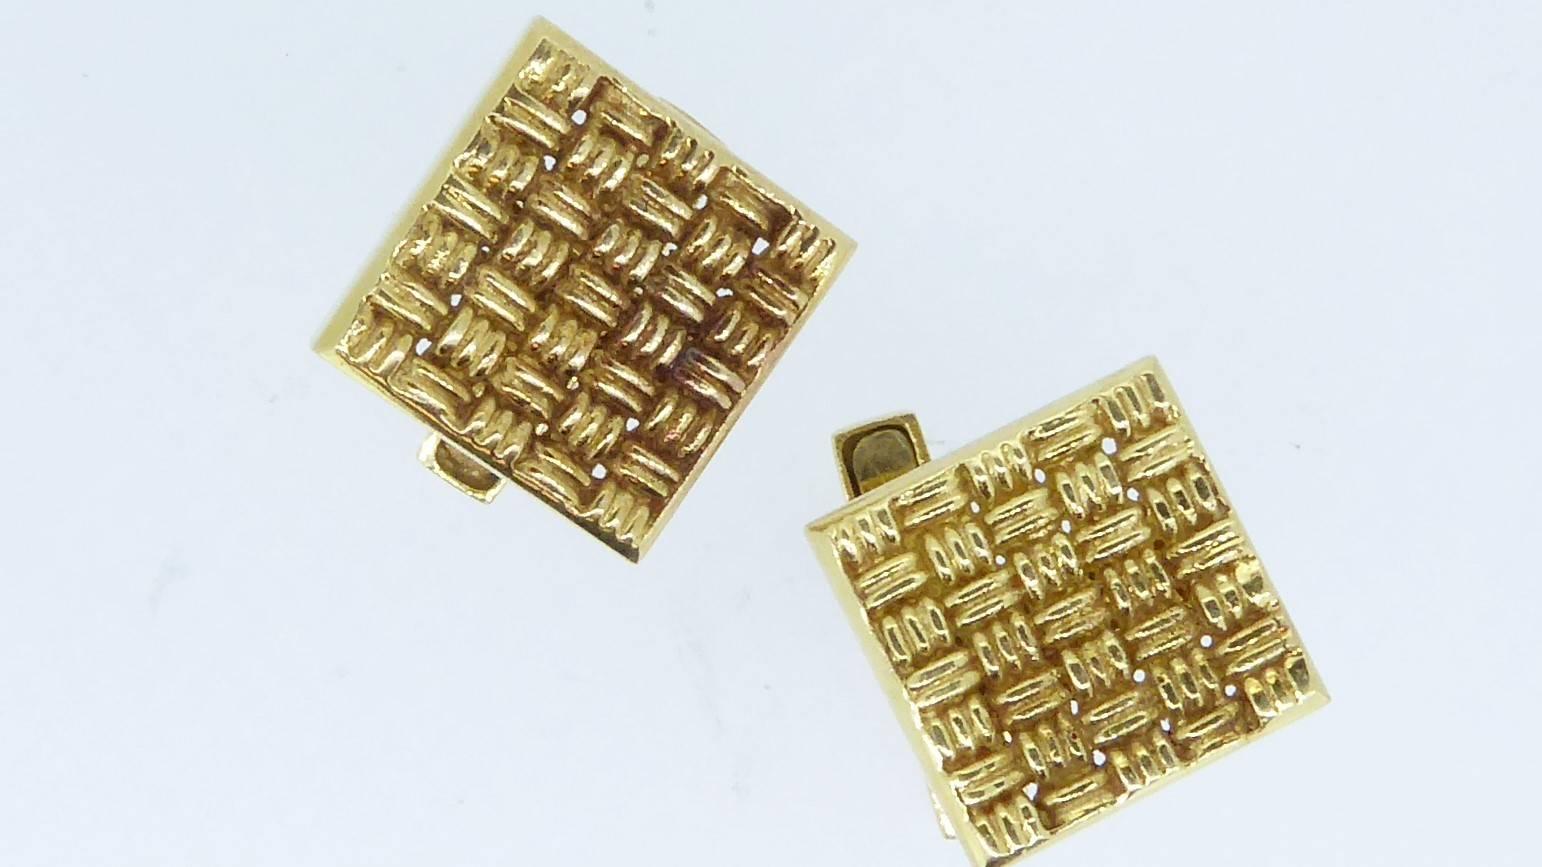 Pair of 18ct yellow gold square panel cufflinks by Lalaounis. Maker's marks for Lalaounis to each cufflink and also stamped 